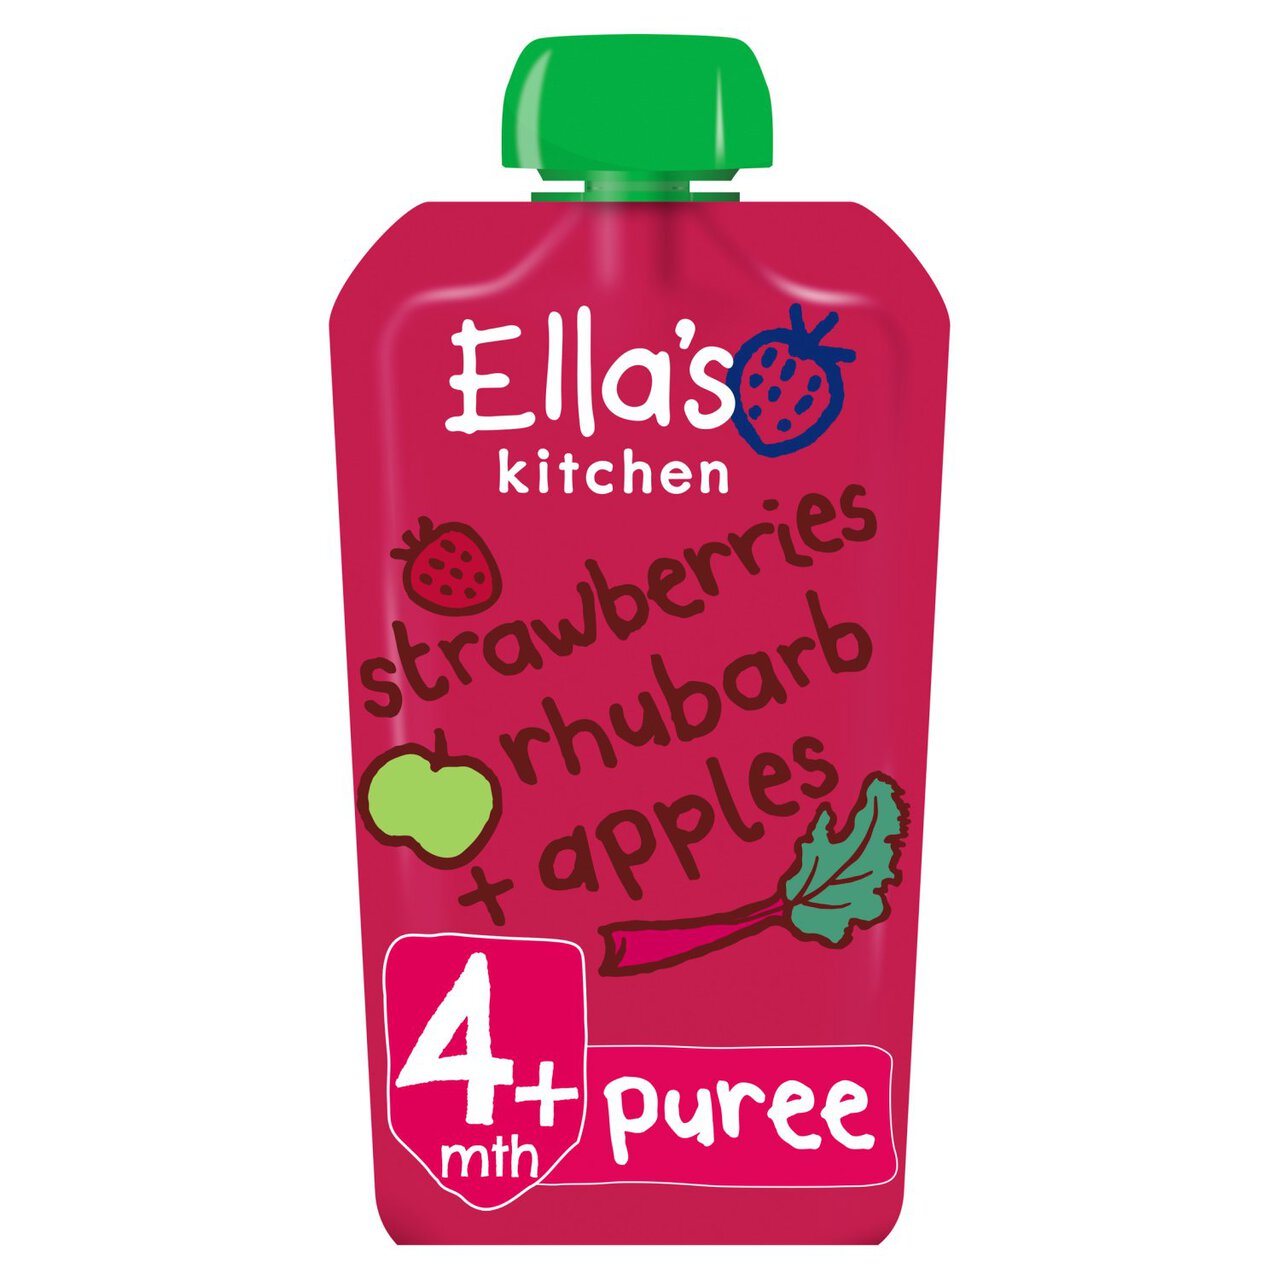 Ella's Kitchen Strawberries, Rhubarb and Apples Baby Food Pouch 4+ Months 120g